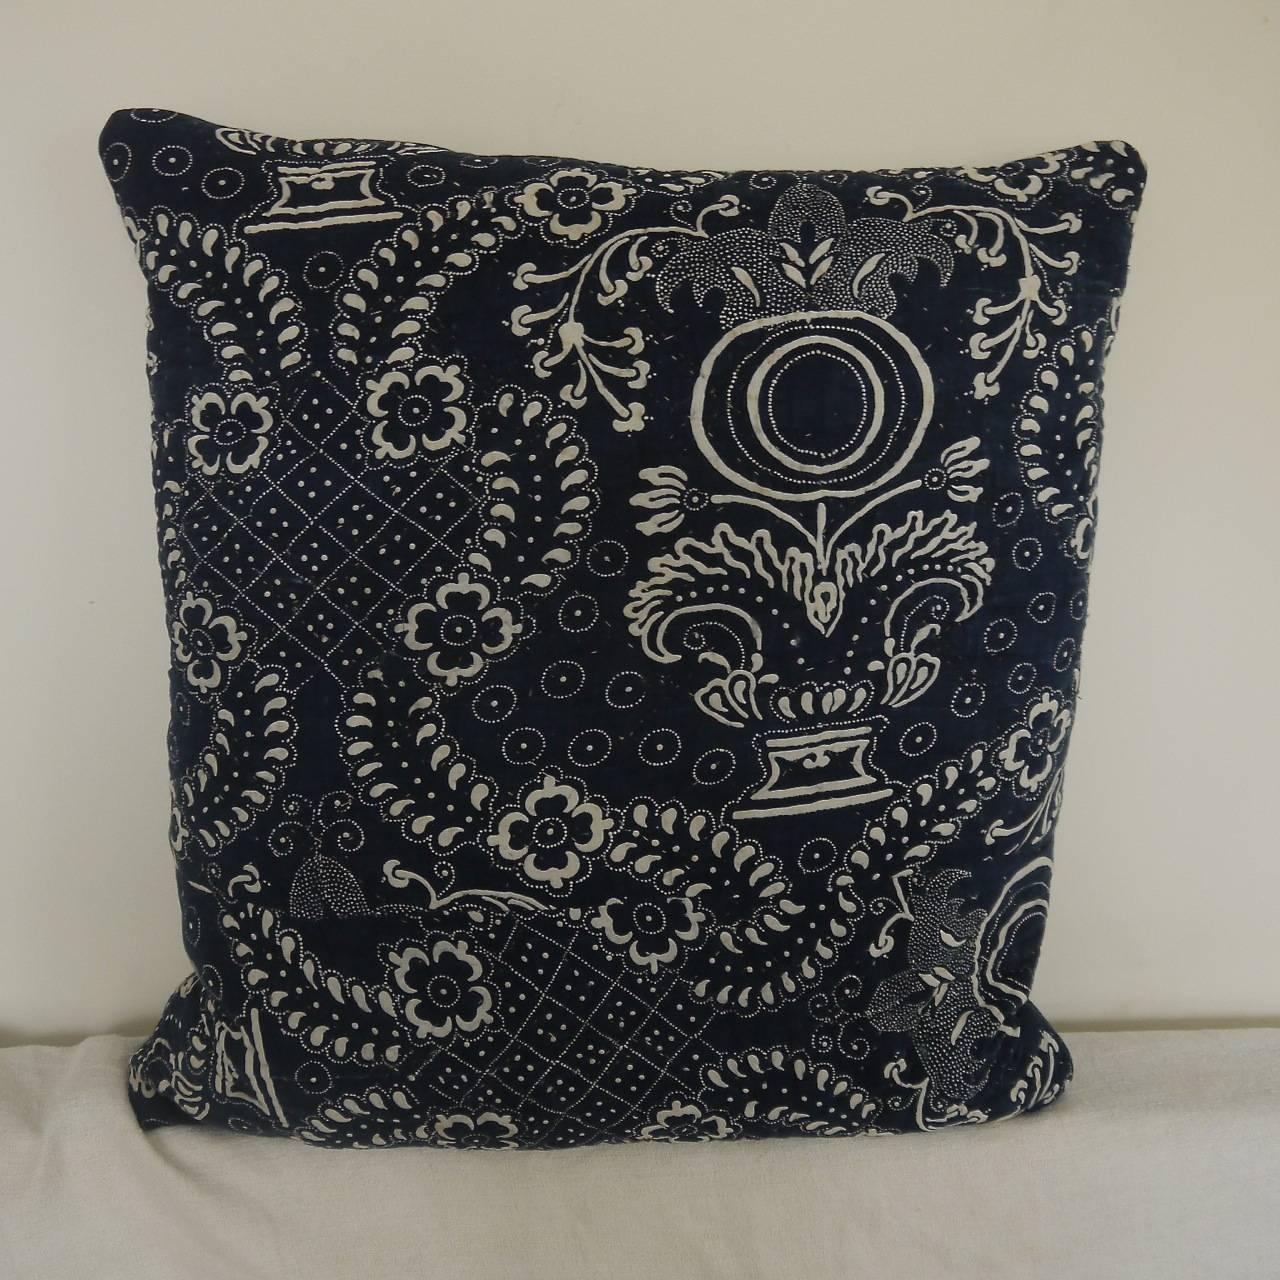 French Toile de Nimes indigo resist block printed cushion. Striking design of stylised pomegranates and floral motifs. Simply quilted and printed on a soft cotton. Towards the bottom of the quilt there is a seam going across with the pattern below